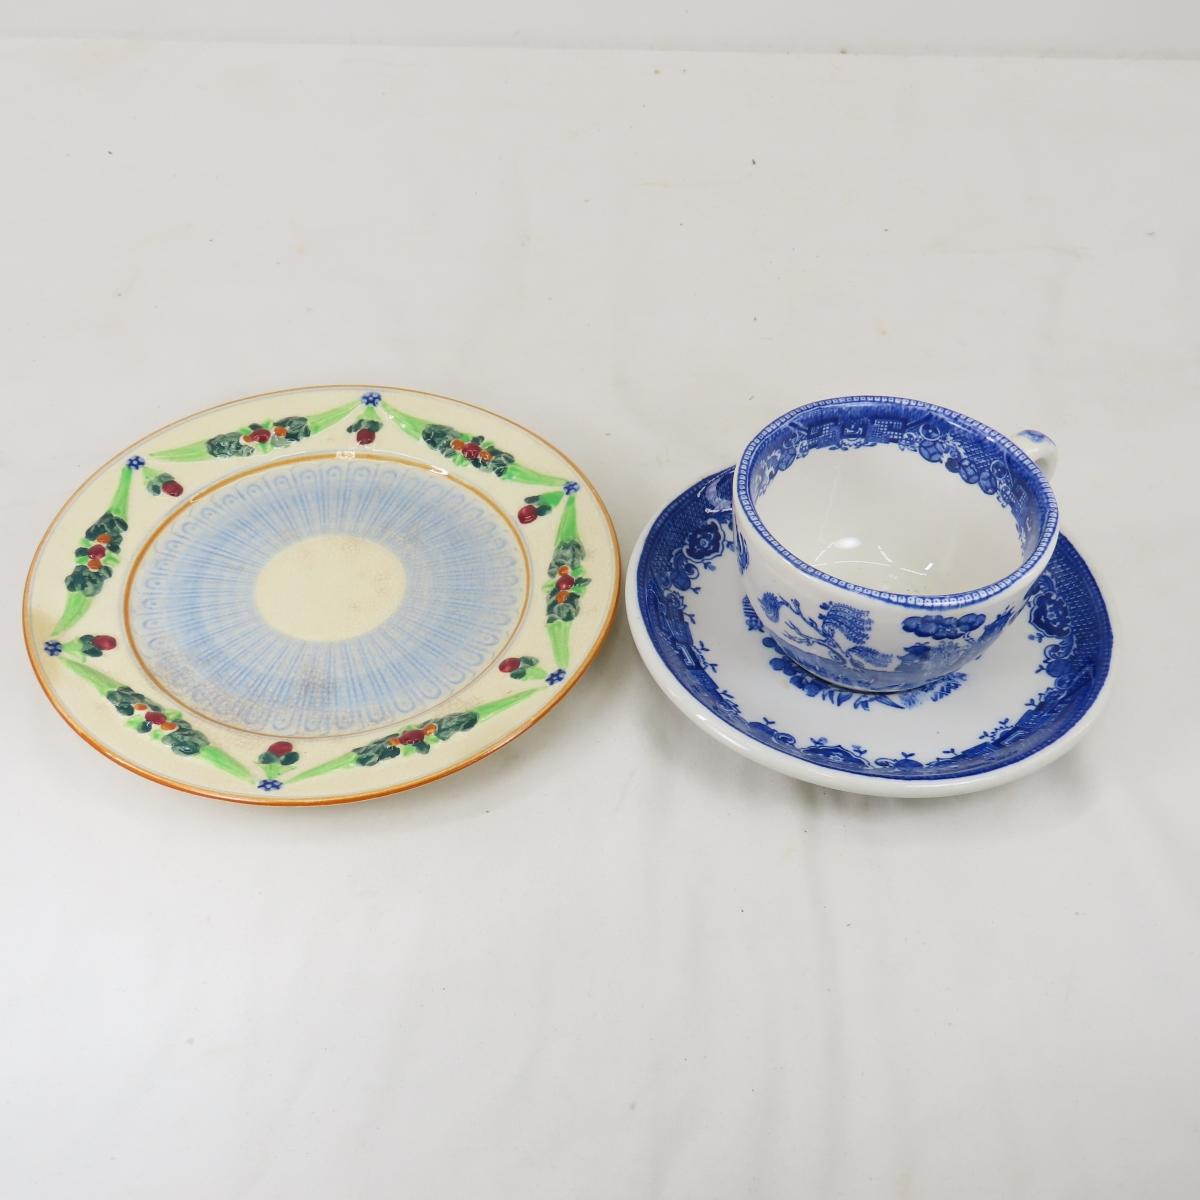 Czech and other antique porcelain ware